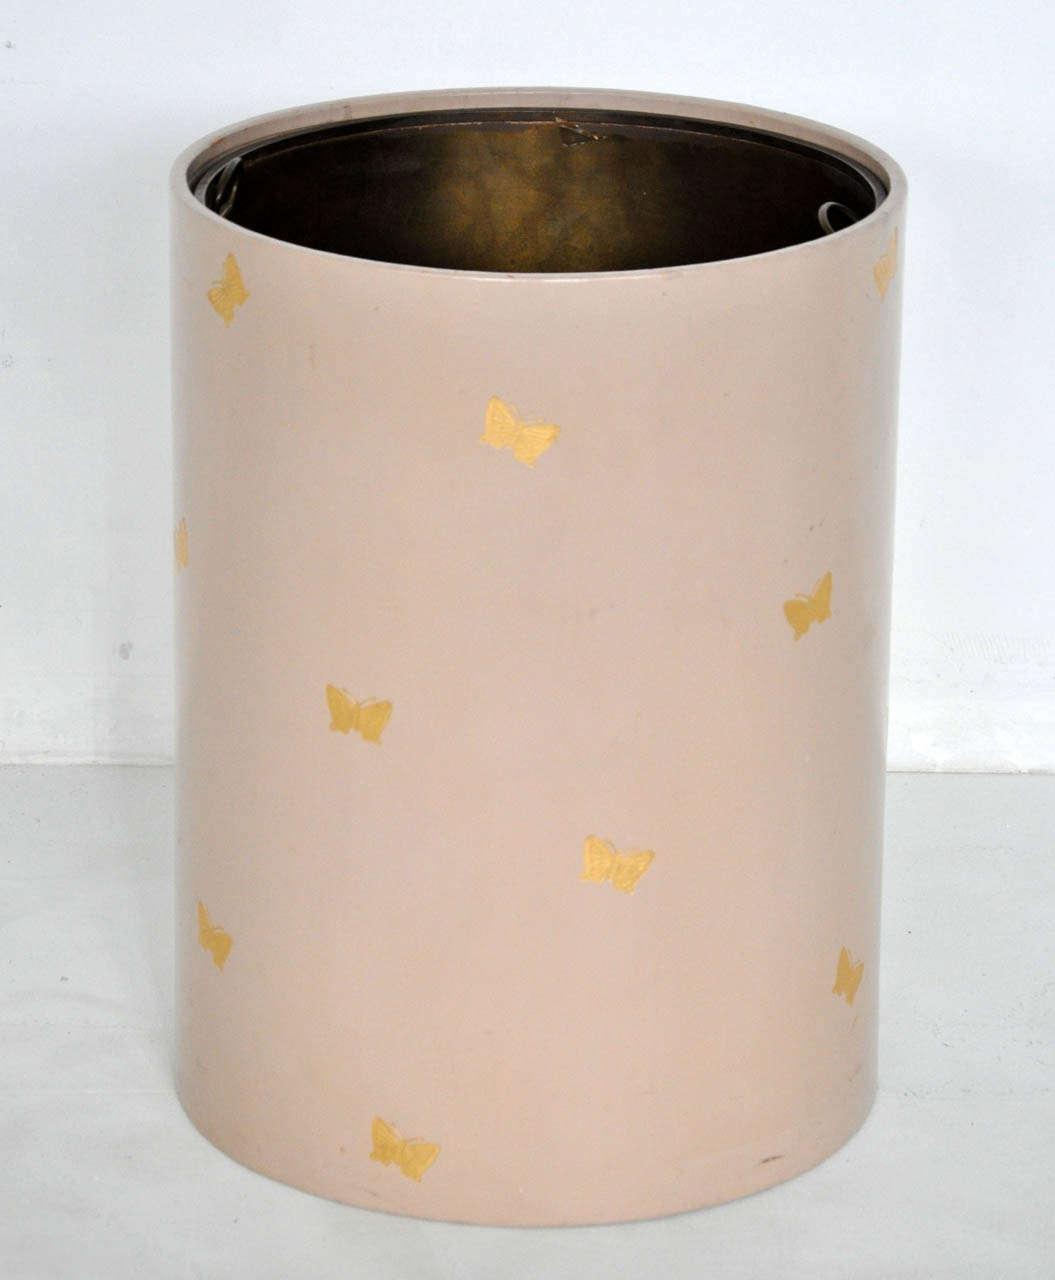 Large wastebasket clad in leather with gold embossed butterflies.  Brass pull-out liner.